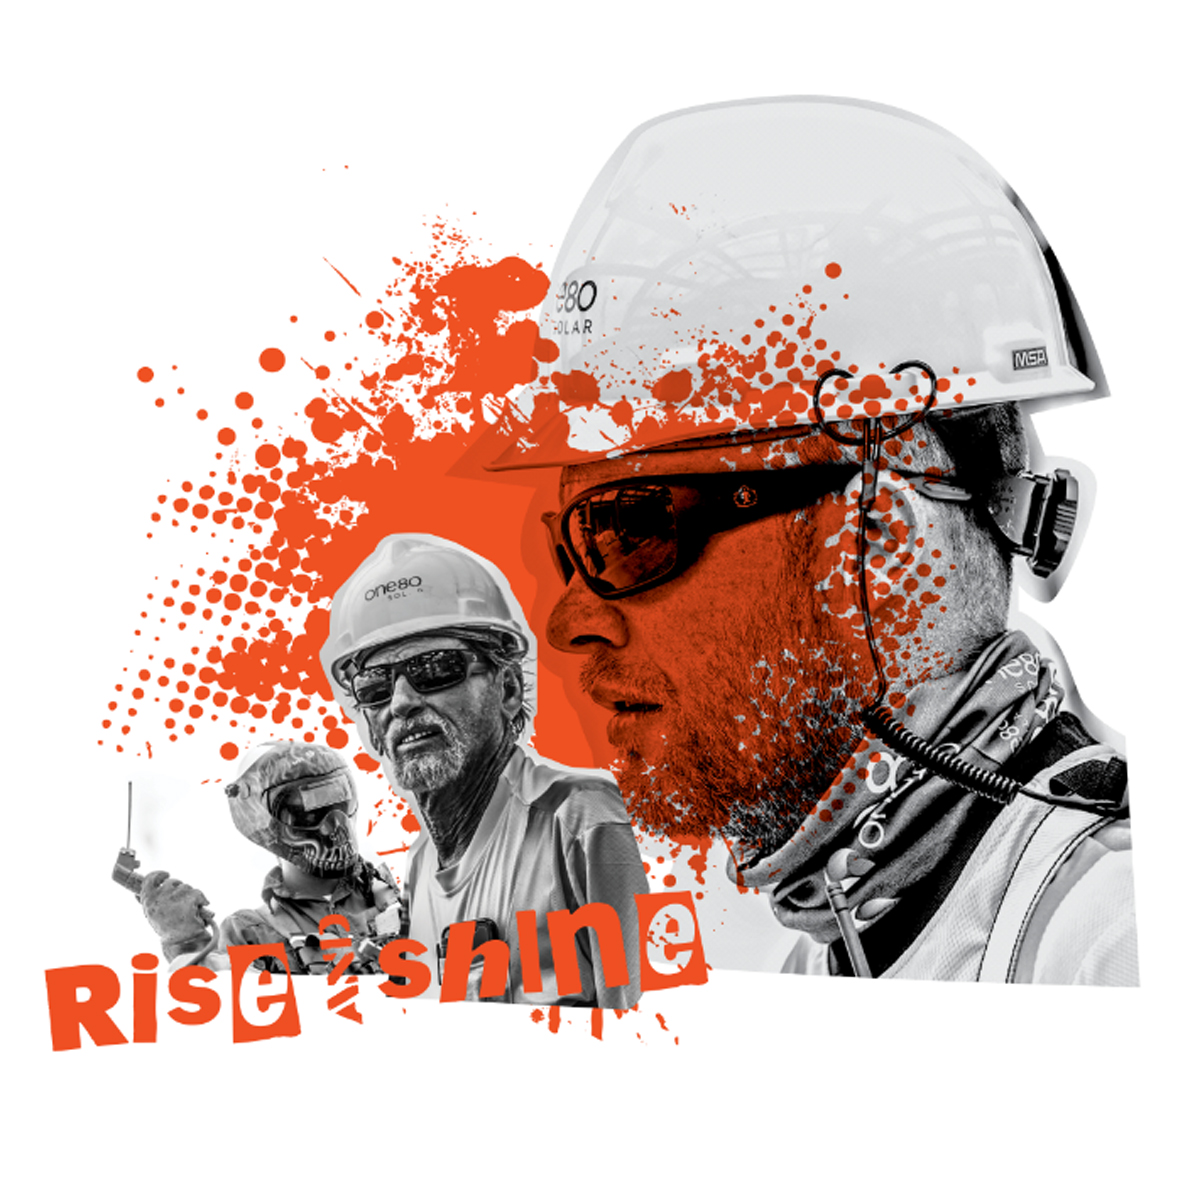 Rise and shine - collage of workers